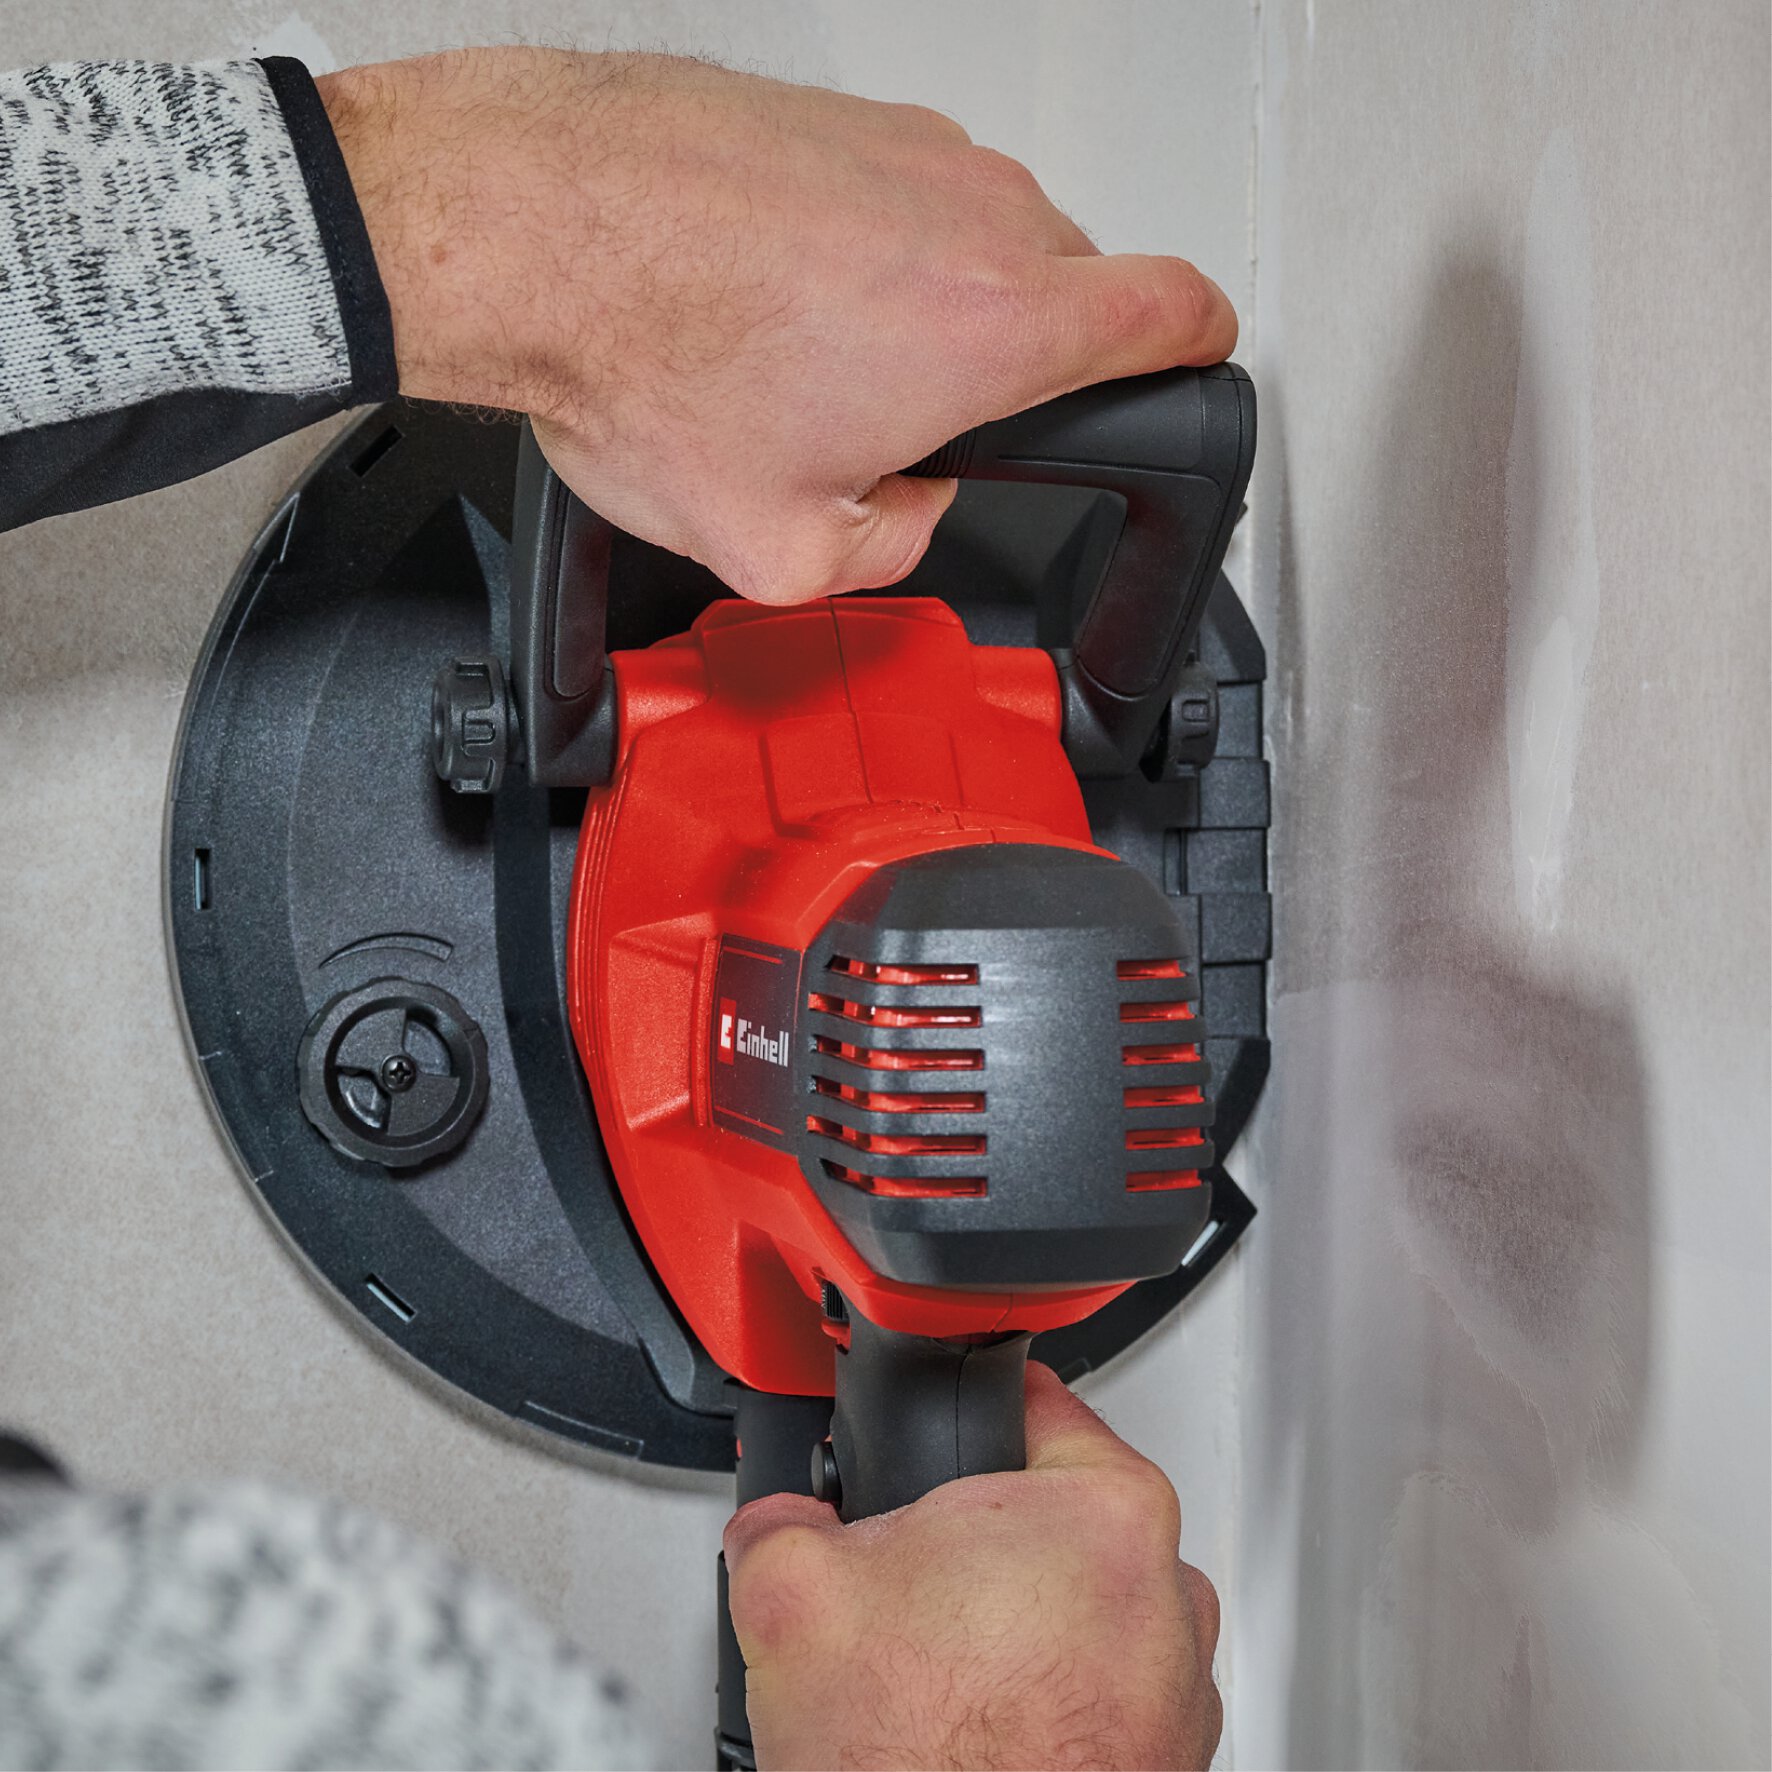 einhell-classic-drywall-polisher-4259945-detail_image-001